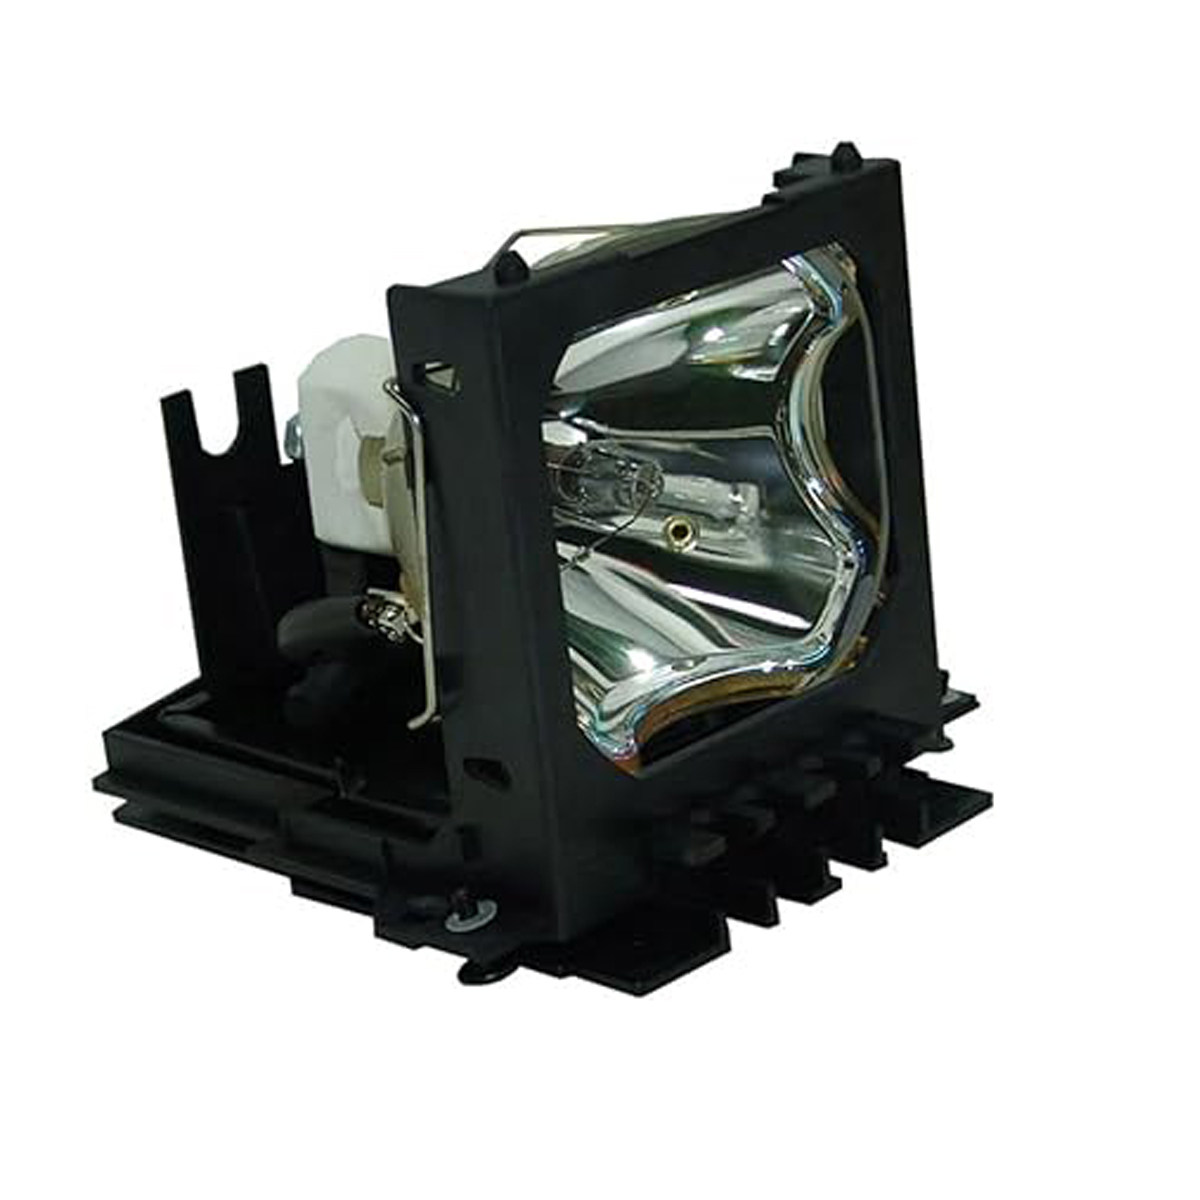 Replacement Projector lamp 456-8942 For Dukane Projector